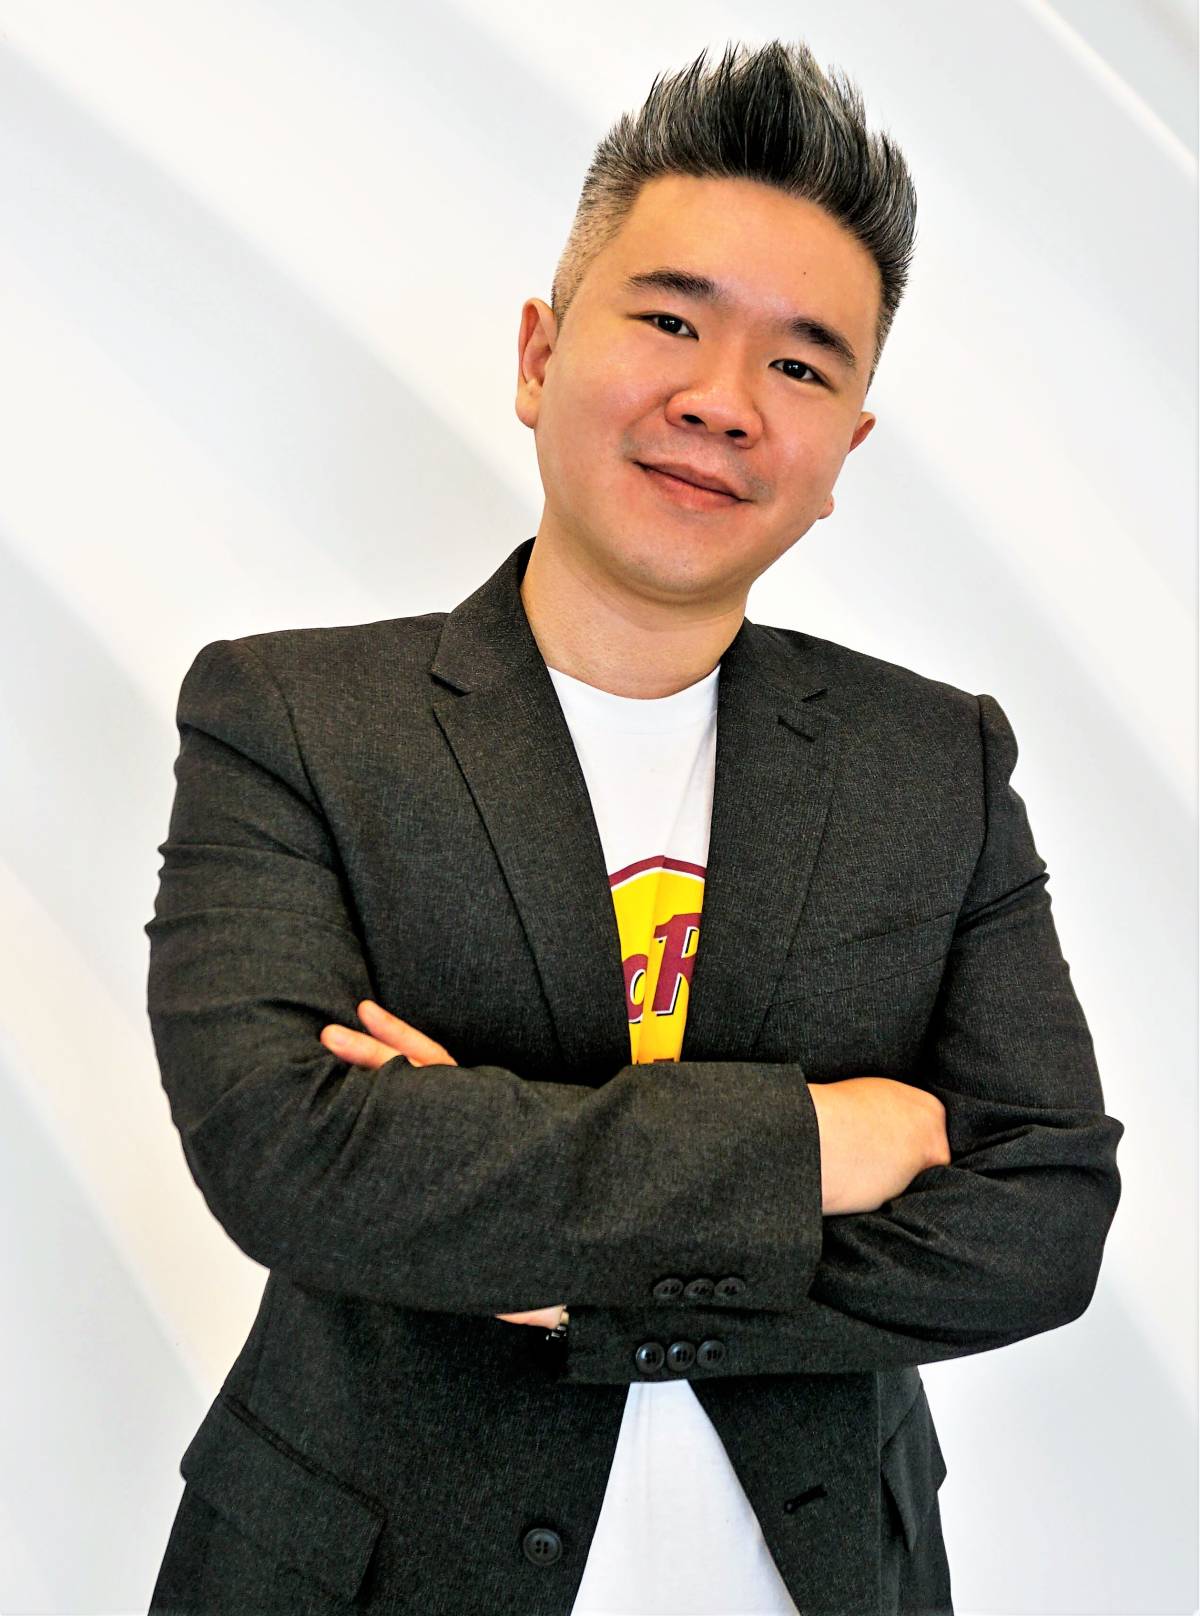 Upcoming Hard Rock Cafe® Puteri Harbour in Johor Appoints General Manager